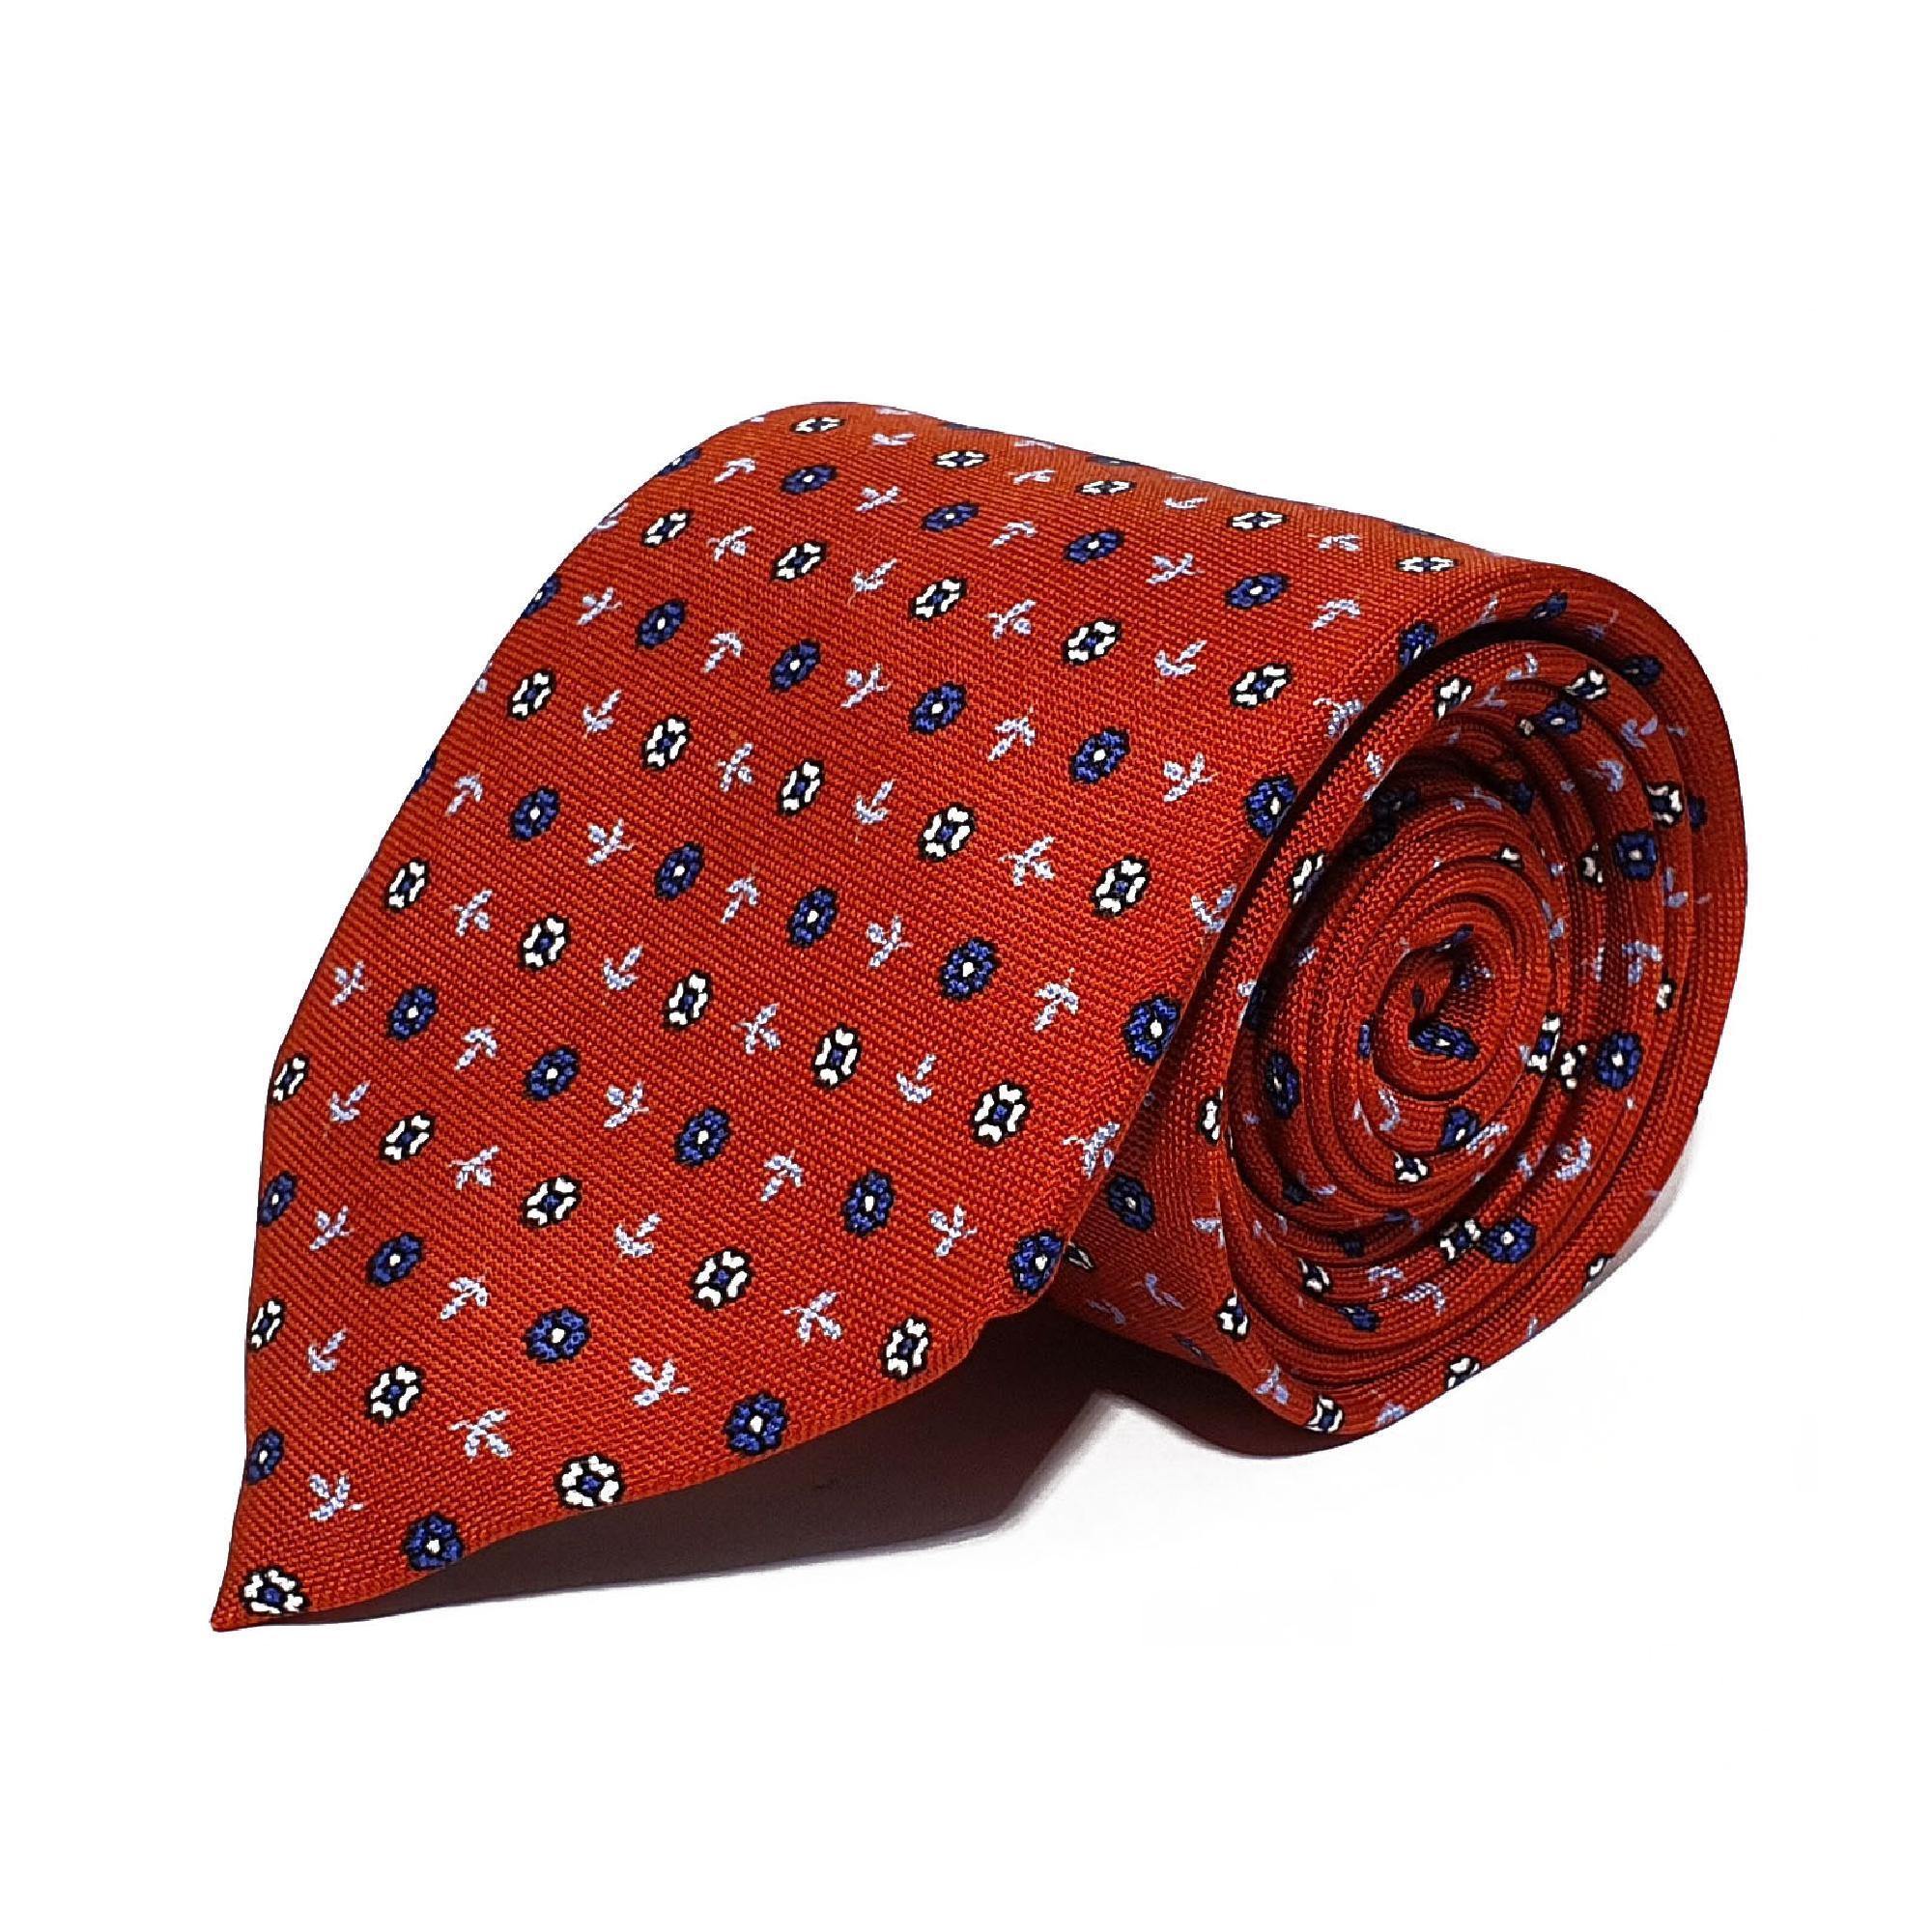 Red Leaves & Flower Woven Silk Tie Hand Finished - British Made